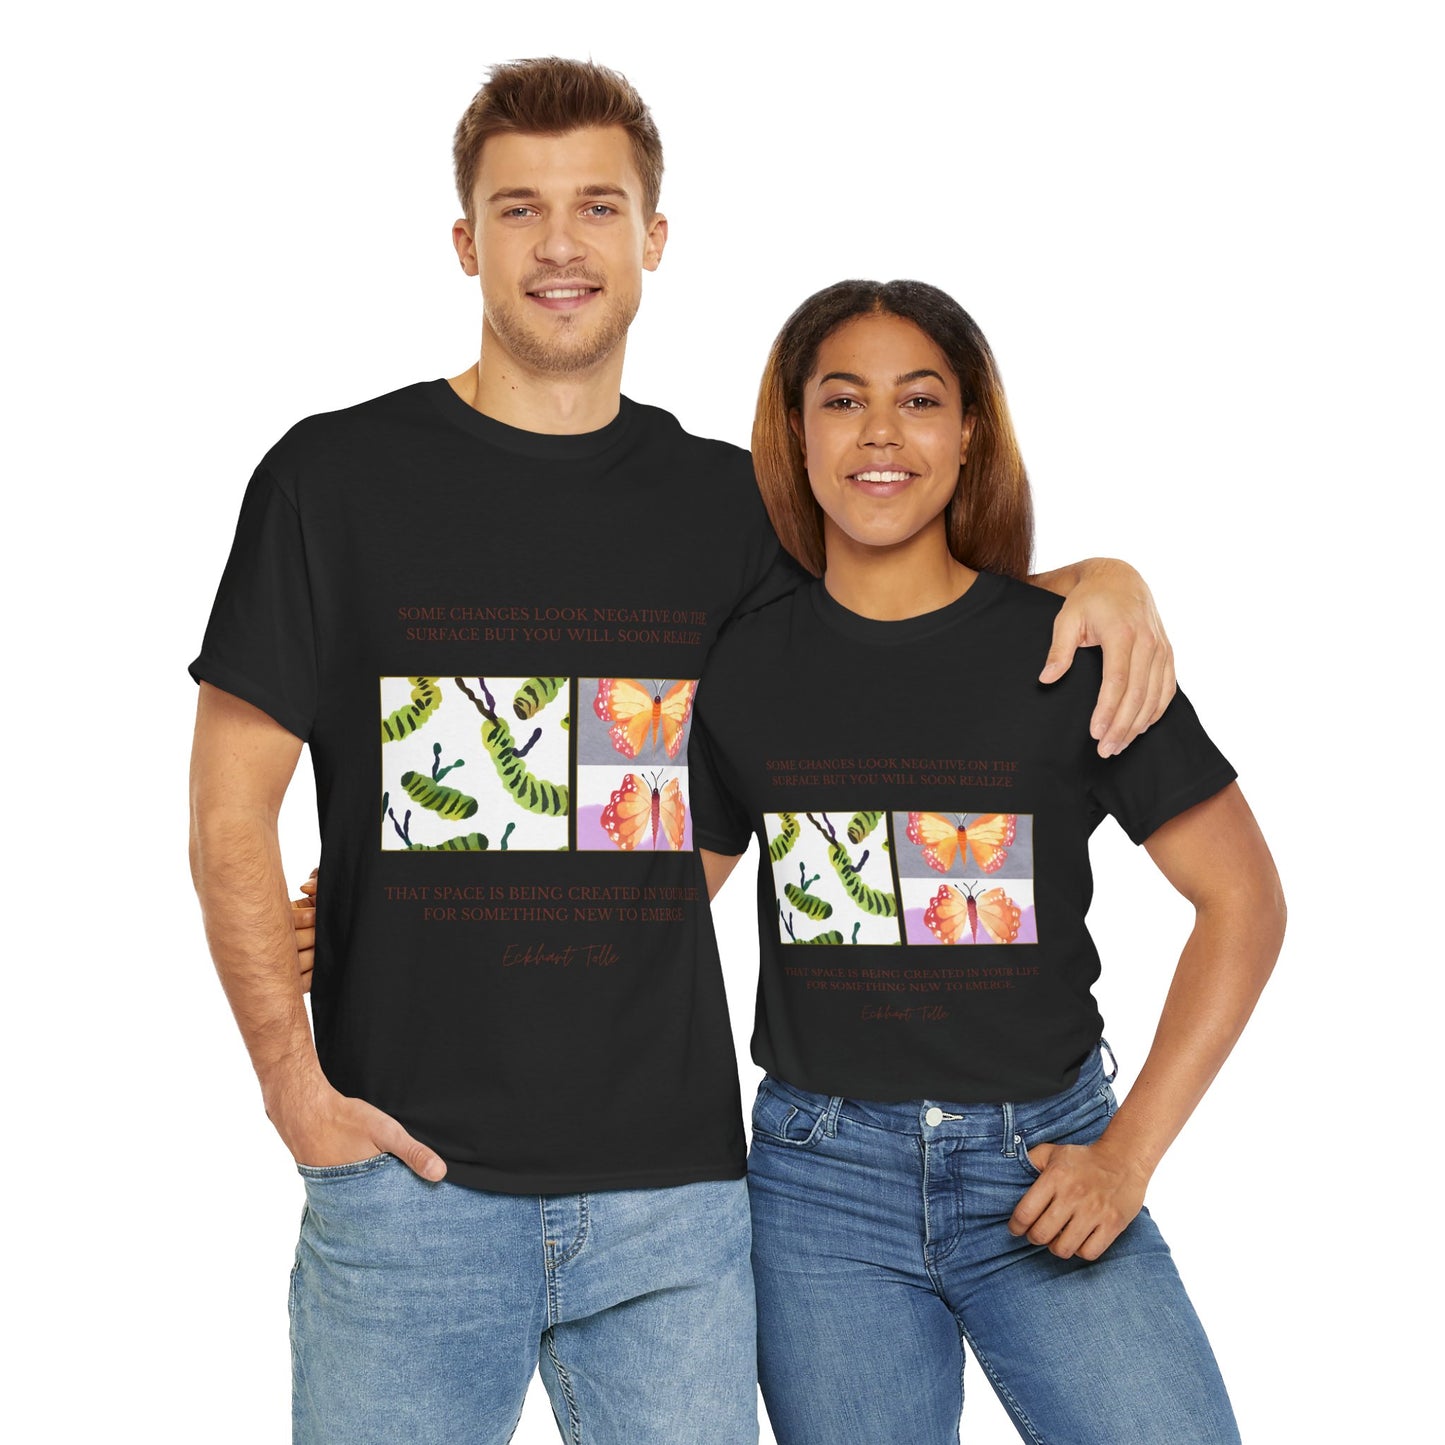 The New Beginnings T-Shirt: Make Room for Growth"Space is being created..." Eckhart Tolle